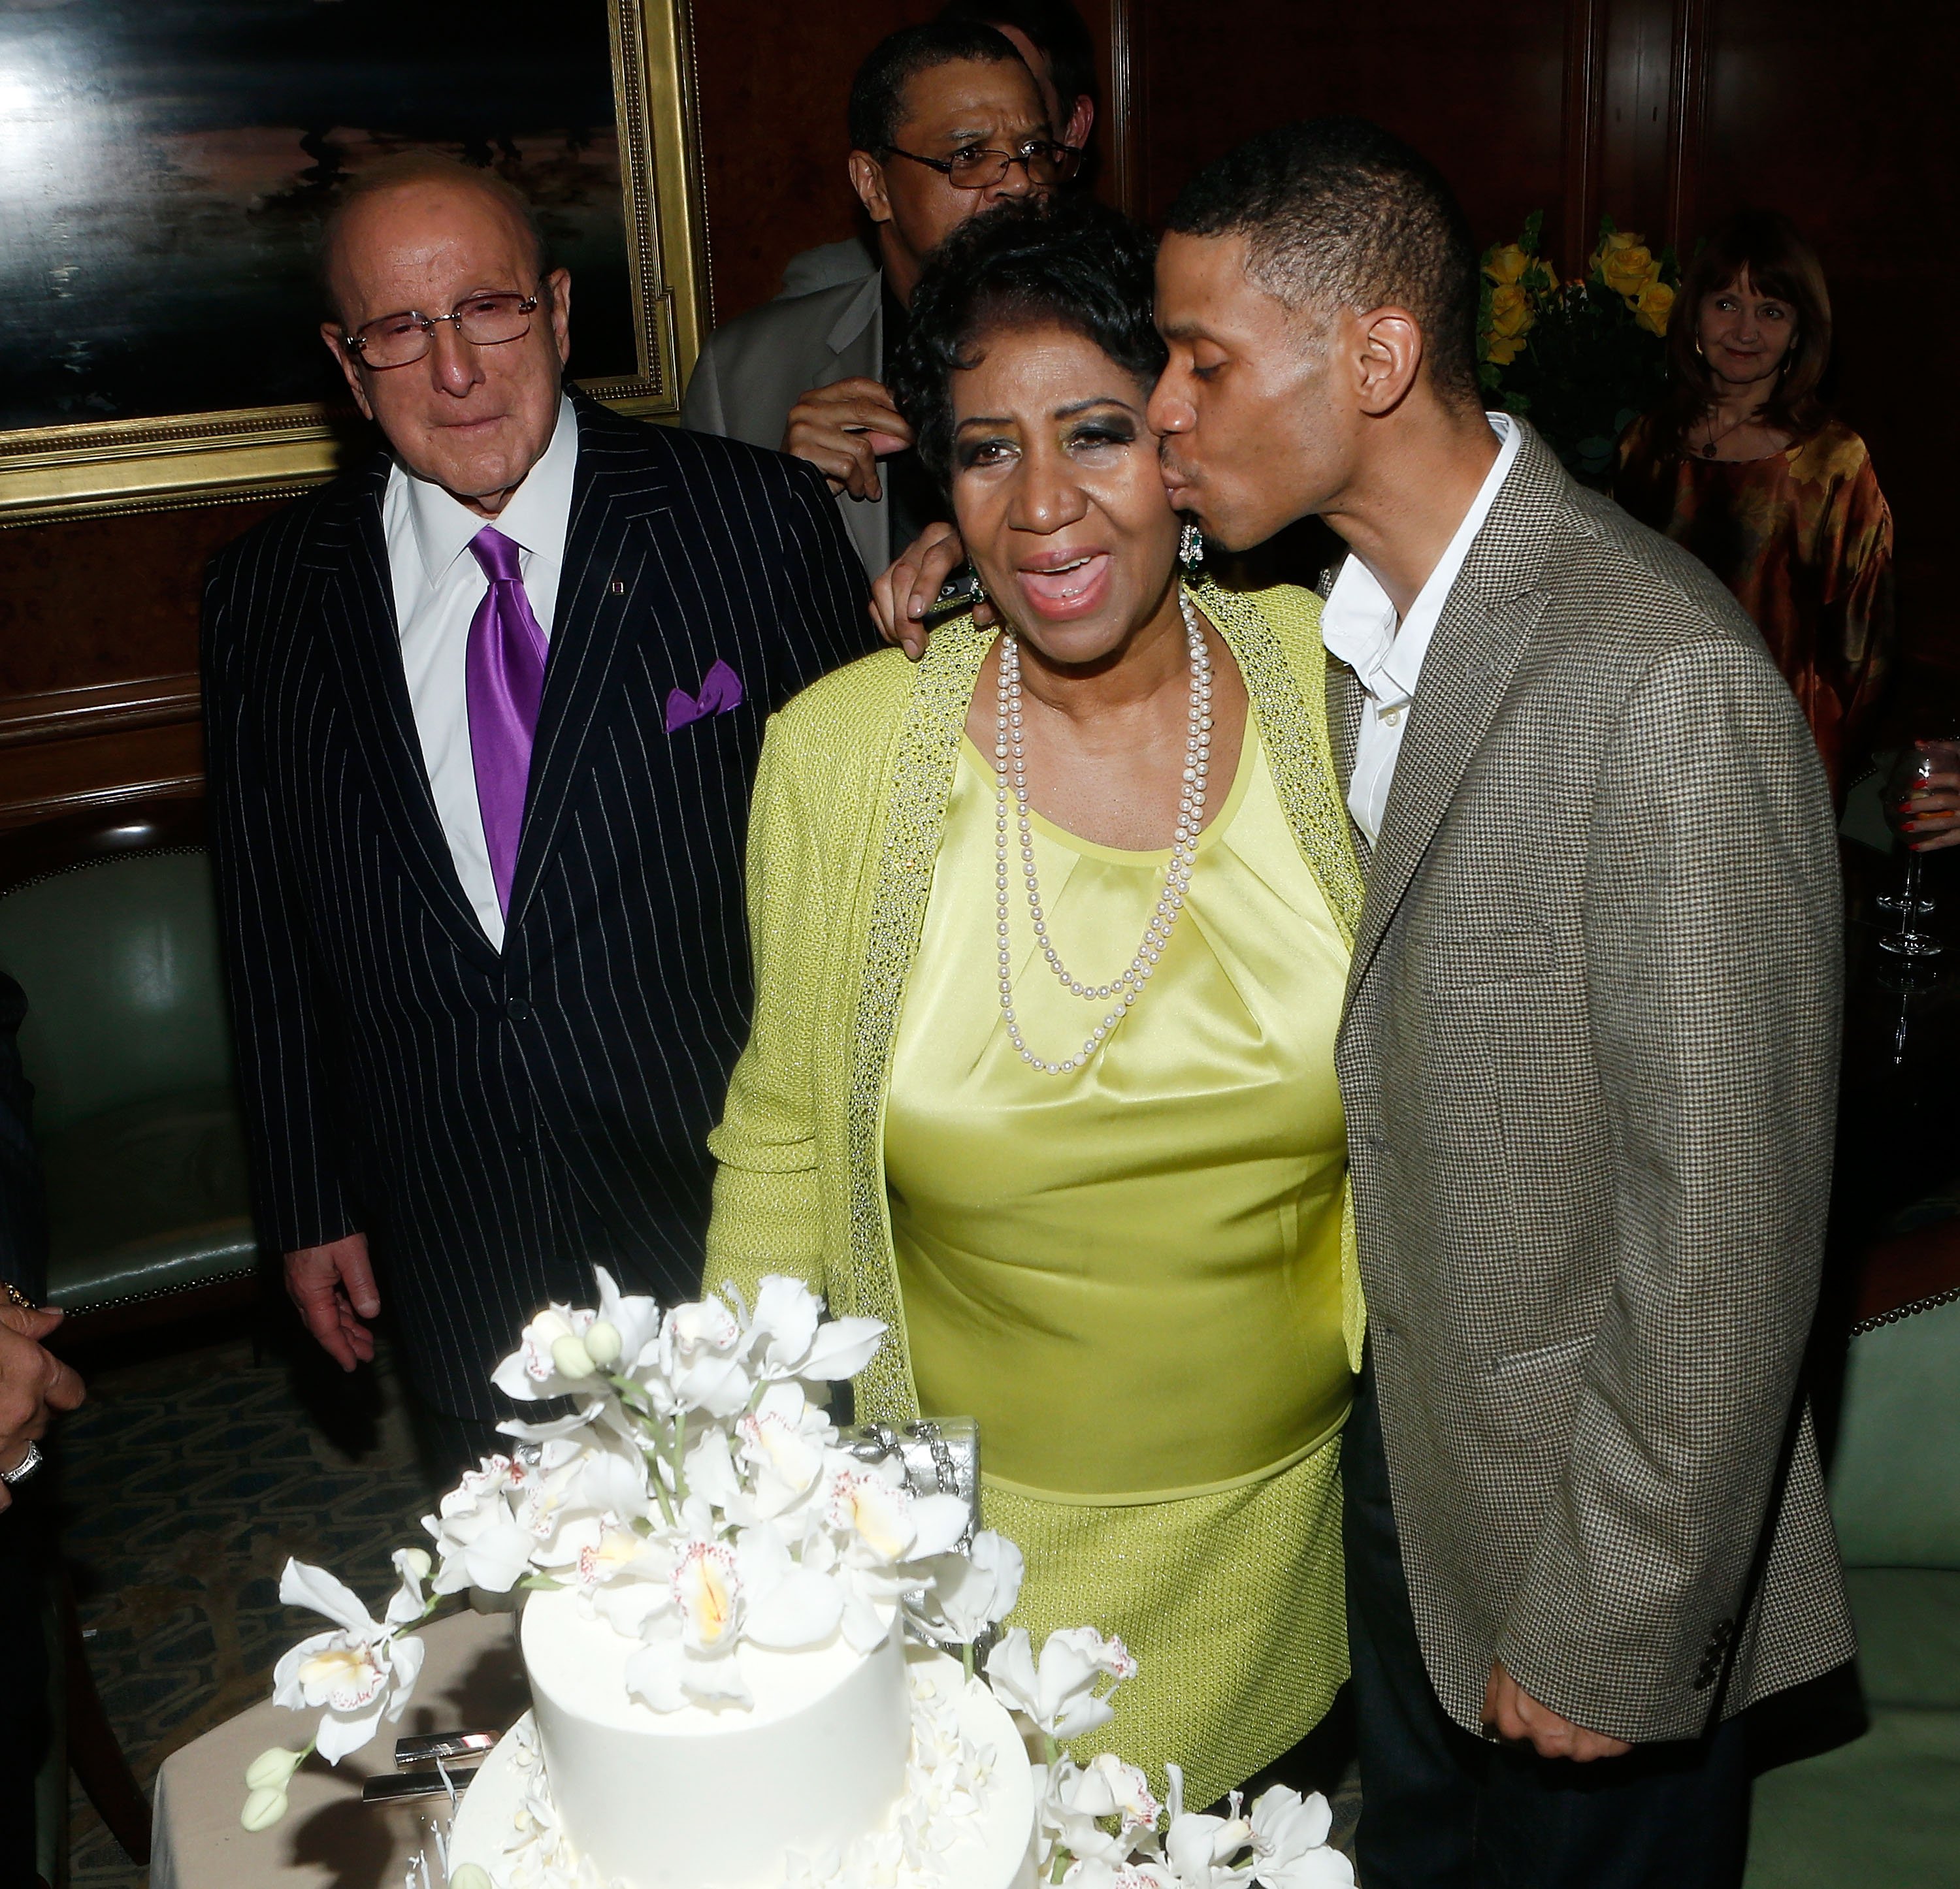 (L-R) Clive Davis, Aretha Franklin & Kecalf Franklin at her Birthday Celebration in New York City on March 22, 2014 | Photo: Getty Images